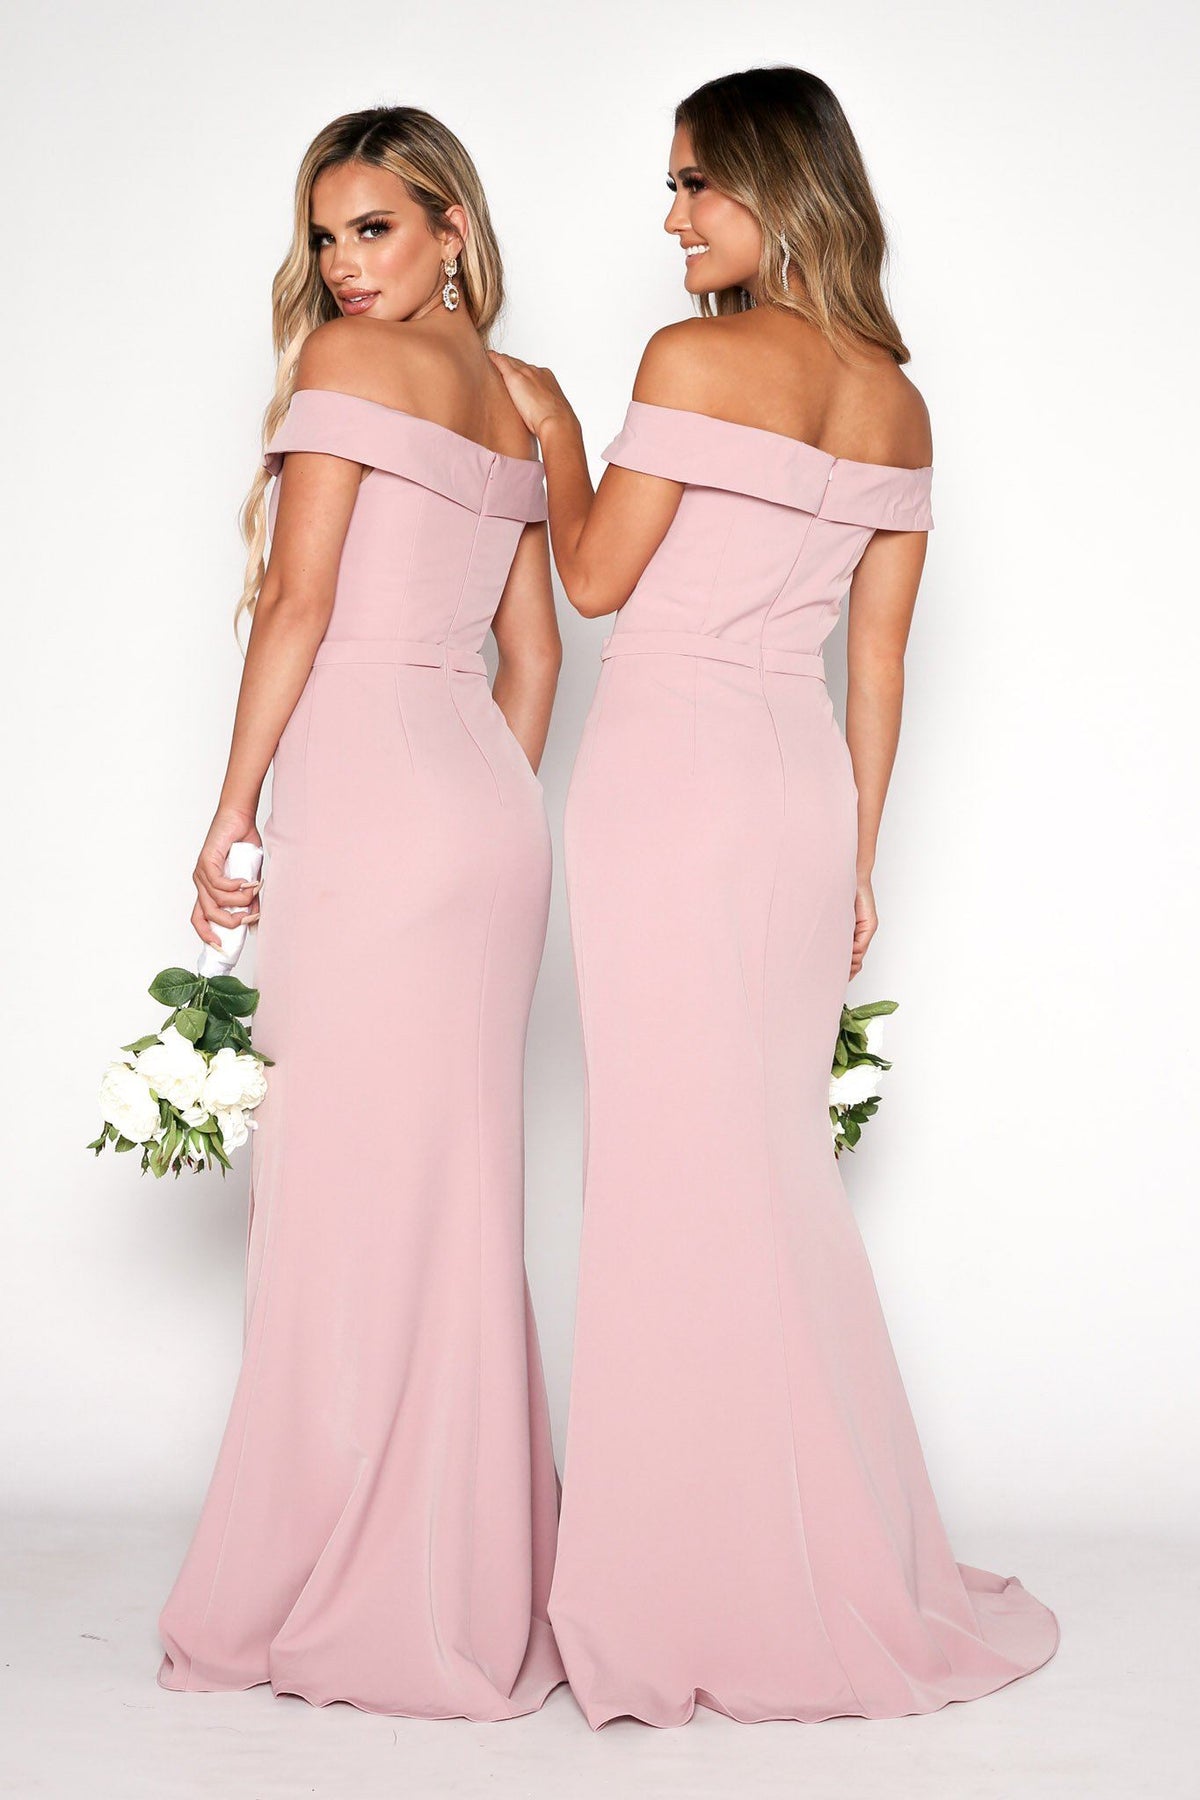 Open Shoulder and Back Design of Dusty Pink Off Shoulder Full Length Bridesmaids Dress with V Cut Out Neckline and Collar Detail, and a Belt Detail at Waistline and Slit on the Left Leg